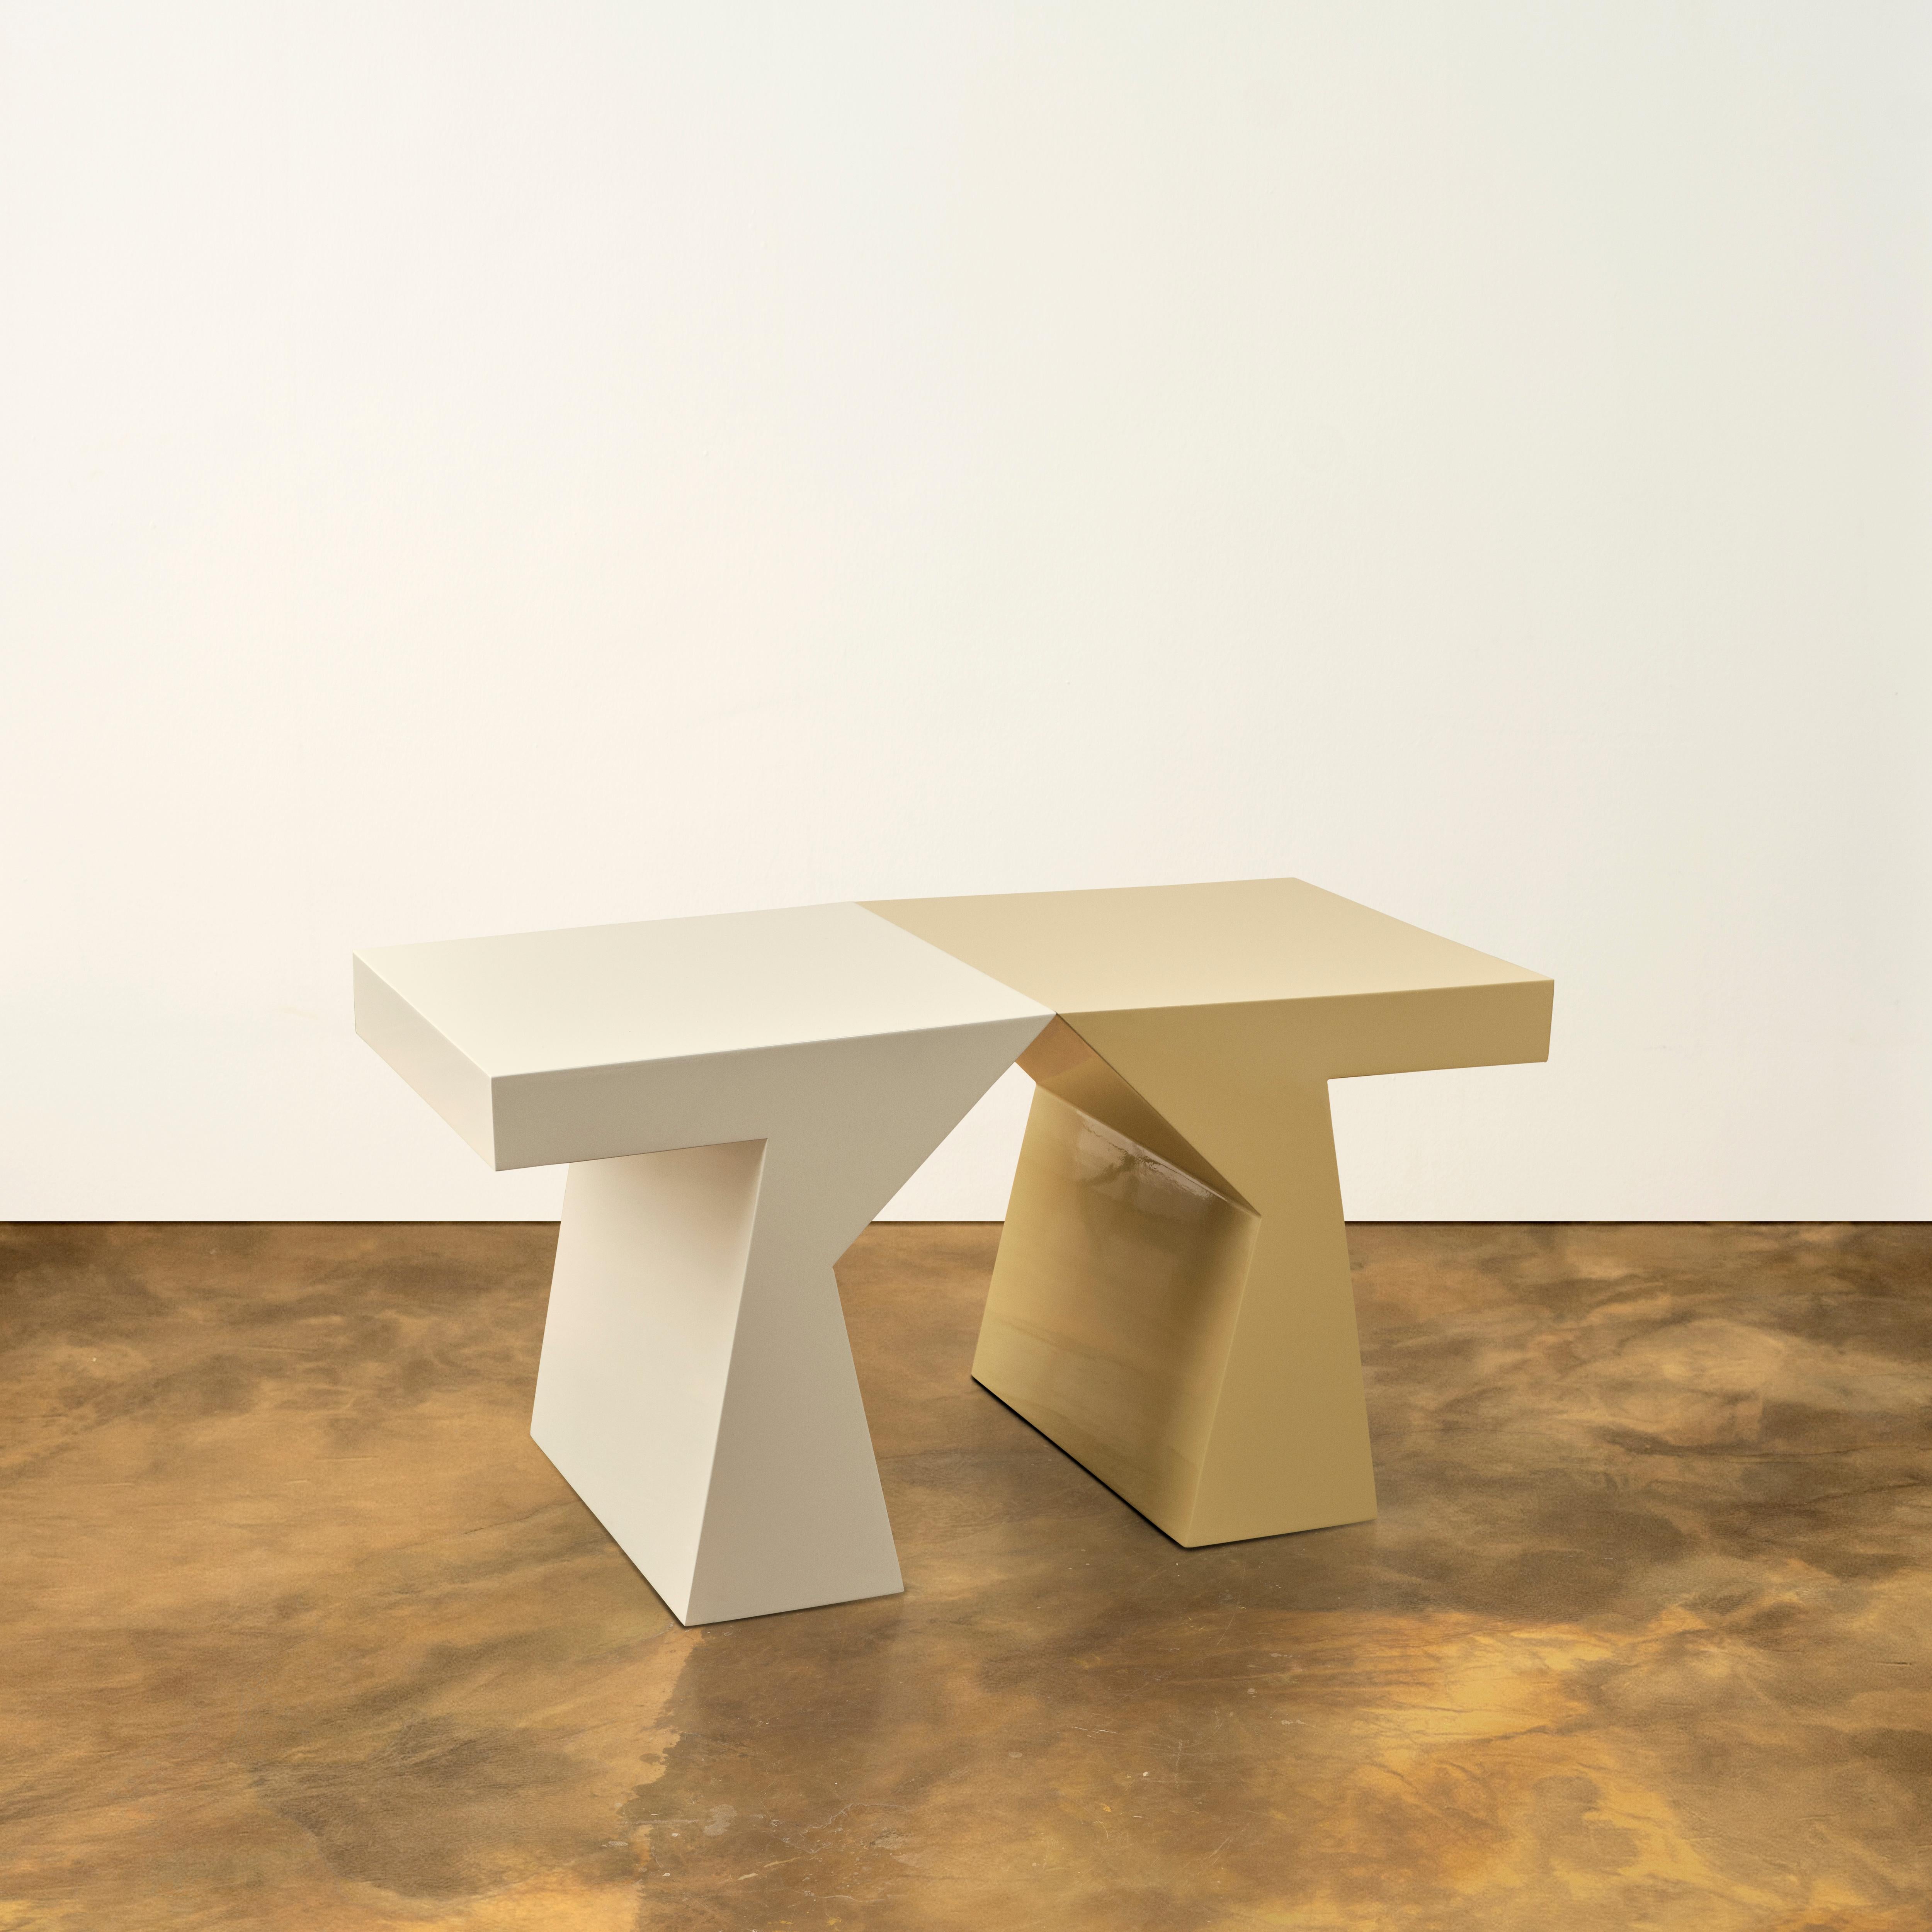 Columbina coffee table is part of the Travelling Performers Collection, having the shape of Columbina side table with a difference in size and material. Made of glossy lacquered wood in different colors, it is a two piece furniture which can be put